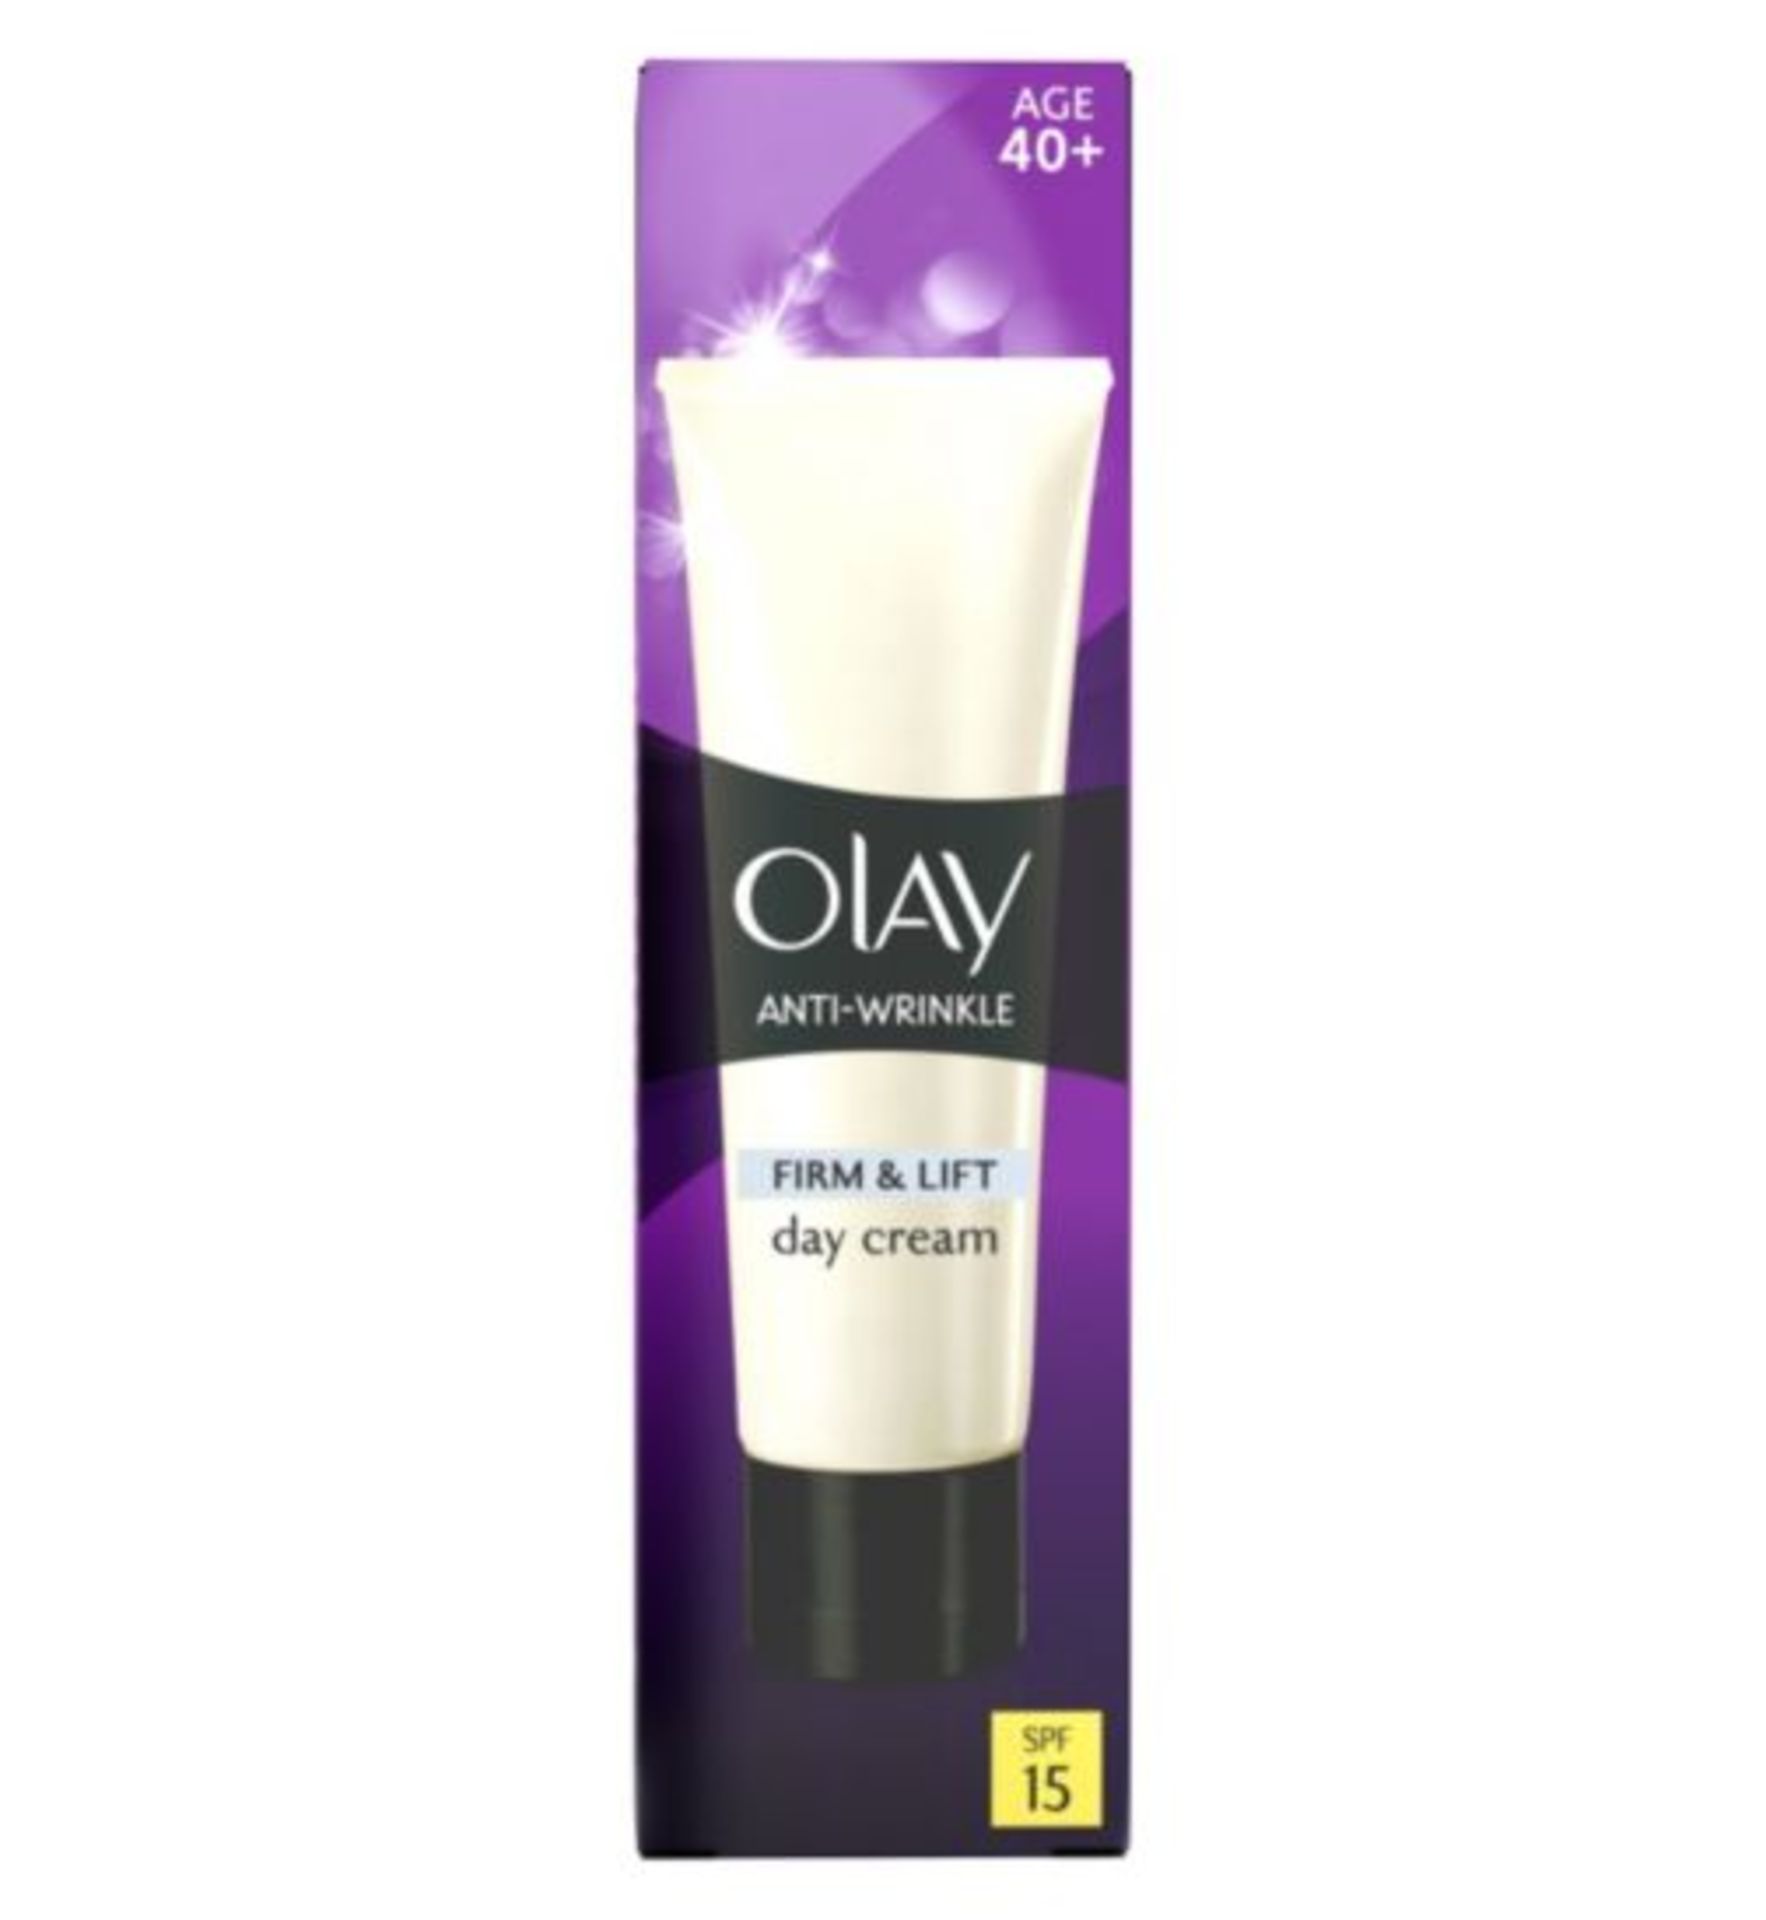 V *TRADE QTY* Brand New Olay Anti-Wrinkle firm and lift day cream SPF 15 Aged 40+ X 3 Bid price to